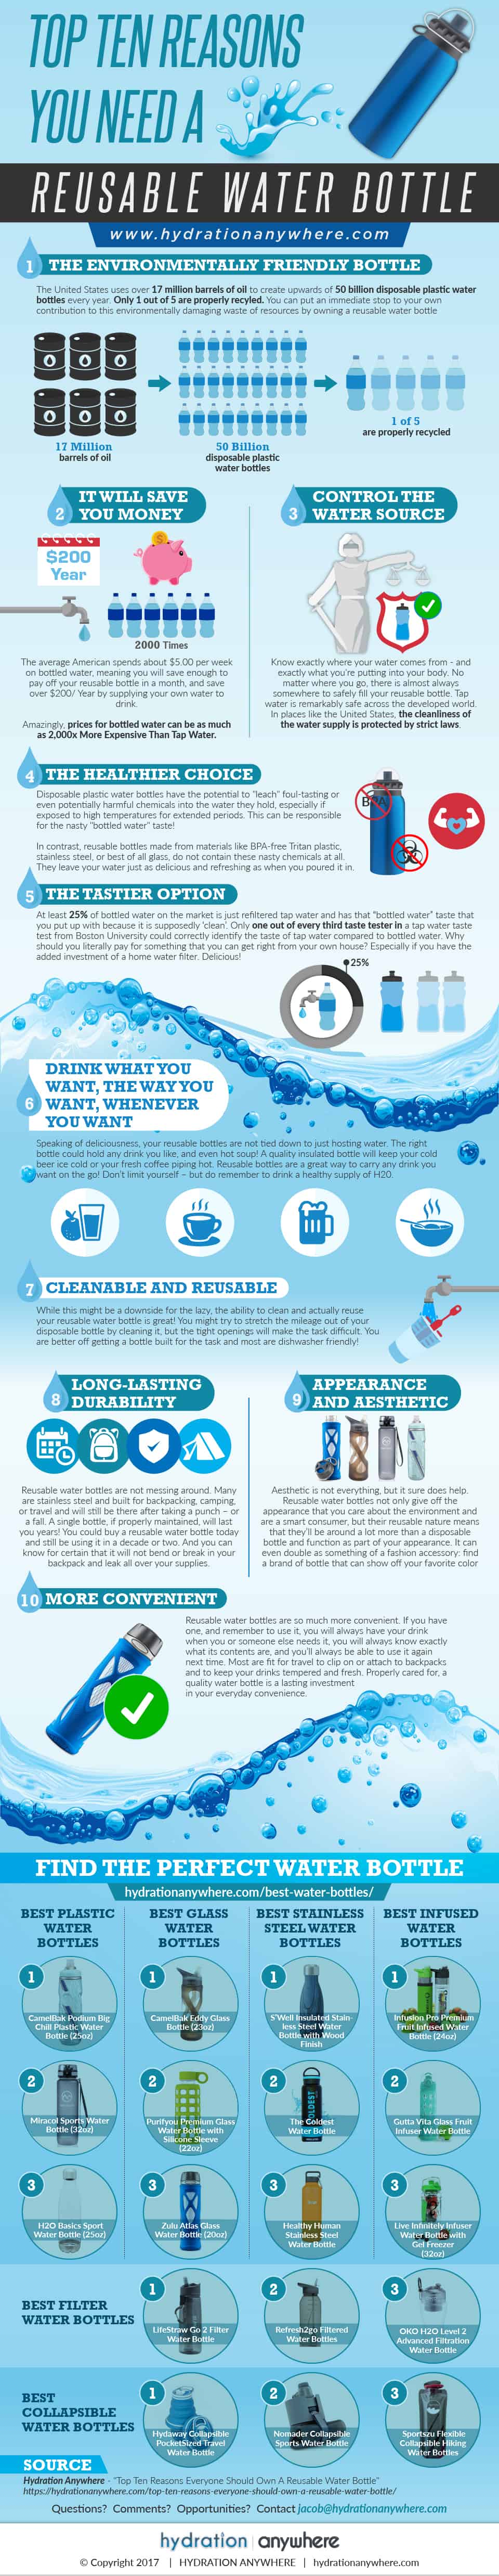 Reasons to Use a Reusable Water Bottle